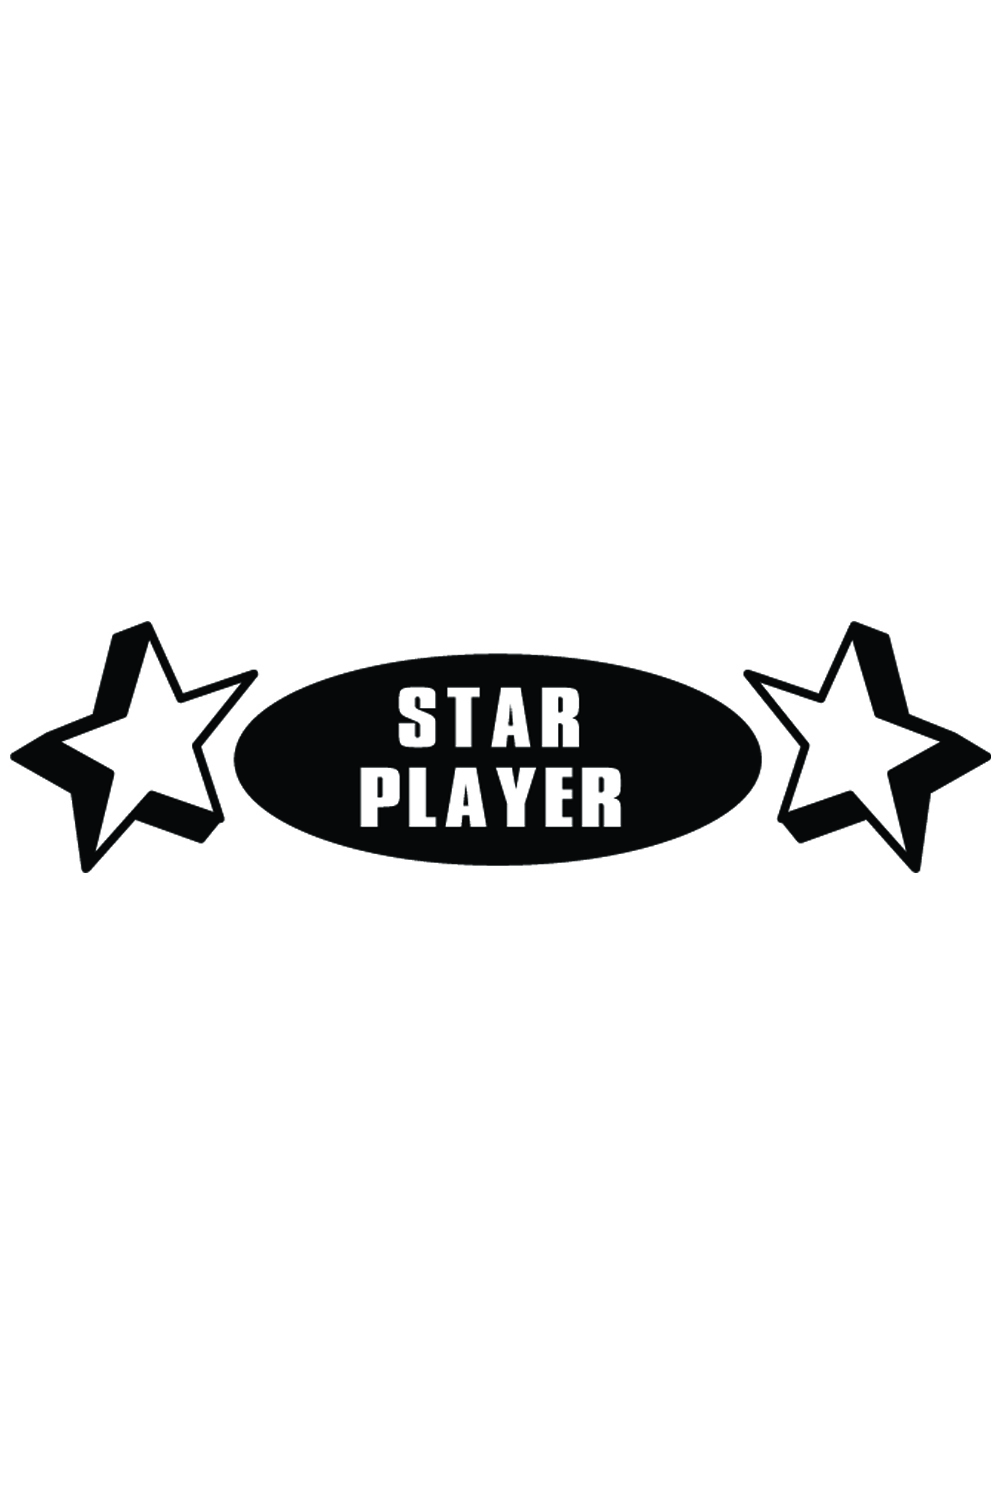 Star Player T Shirt pinterest preview image.